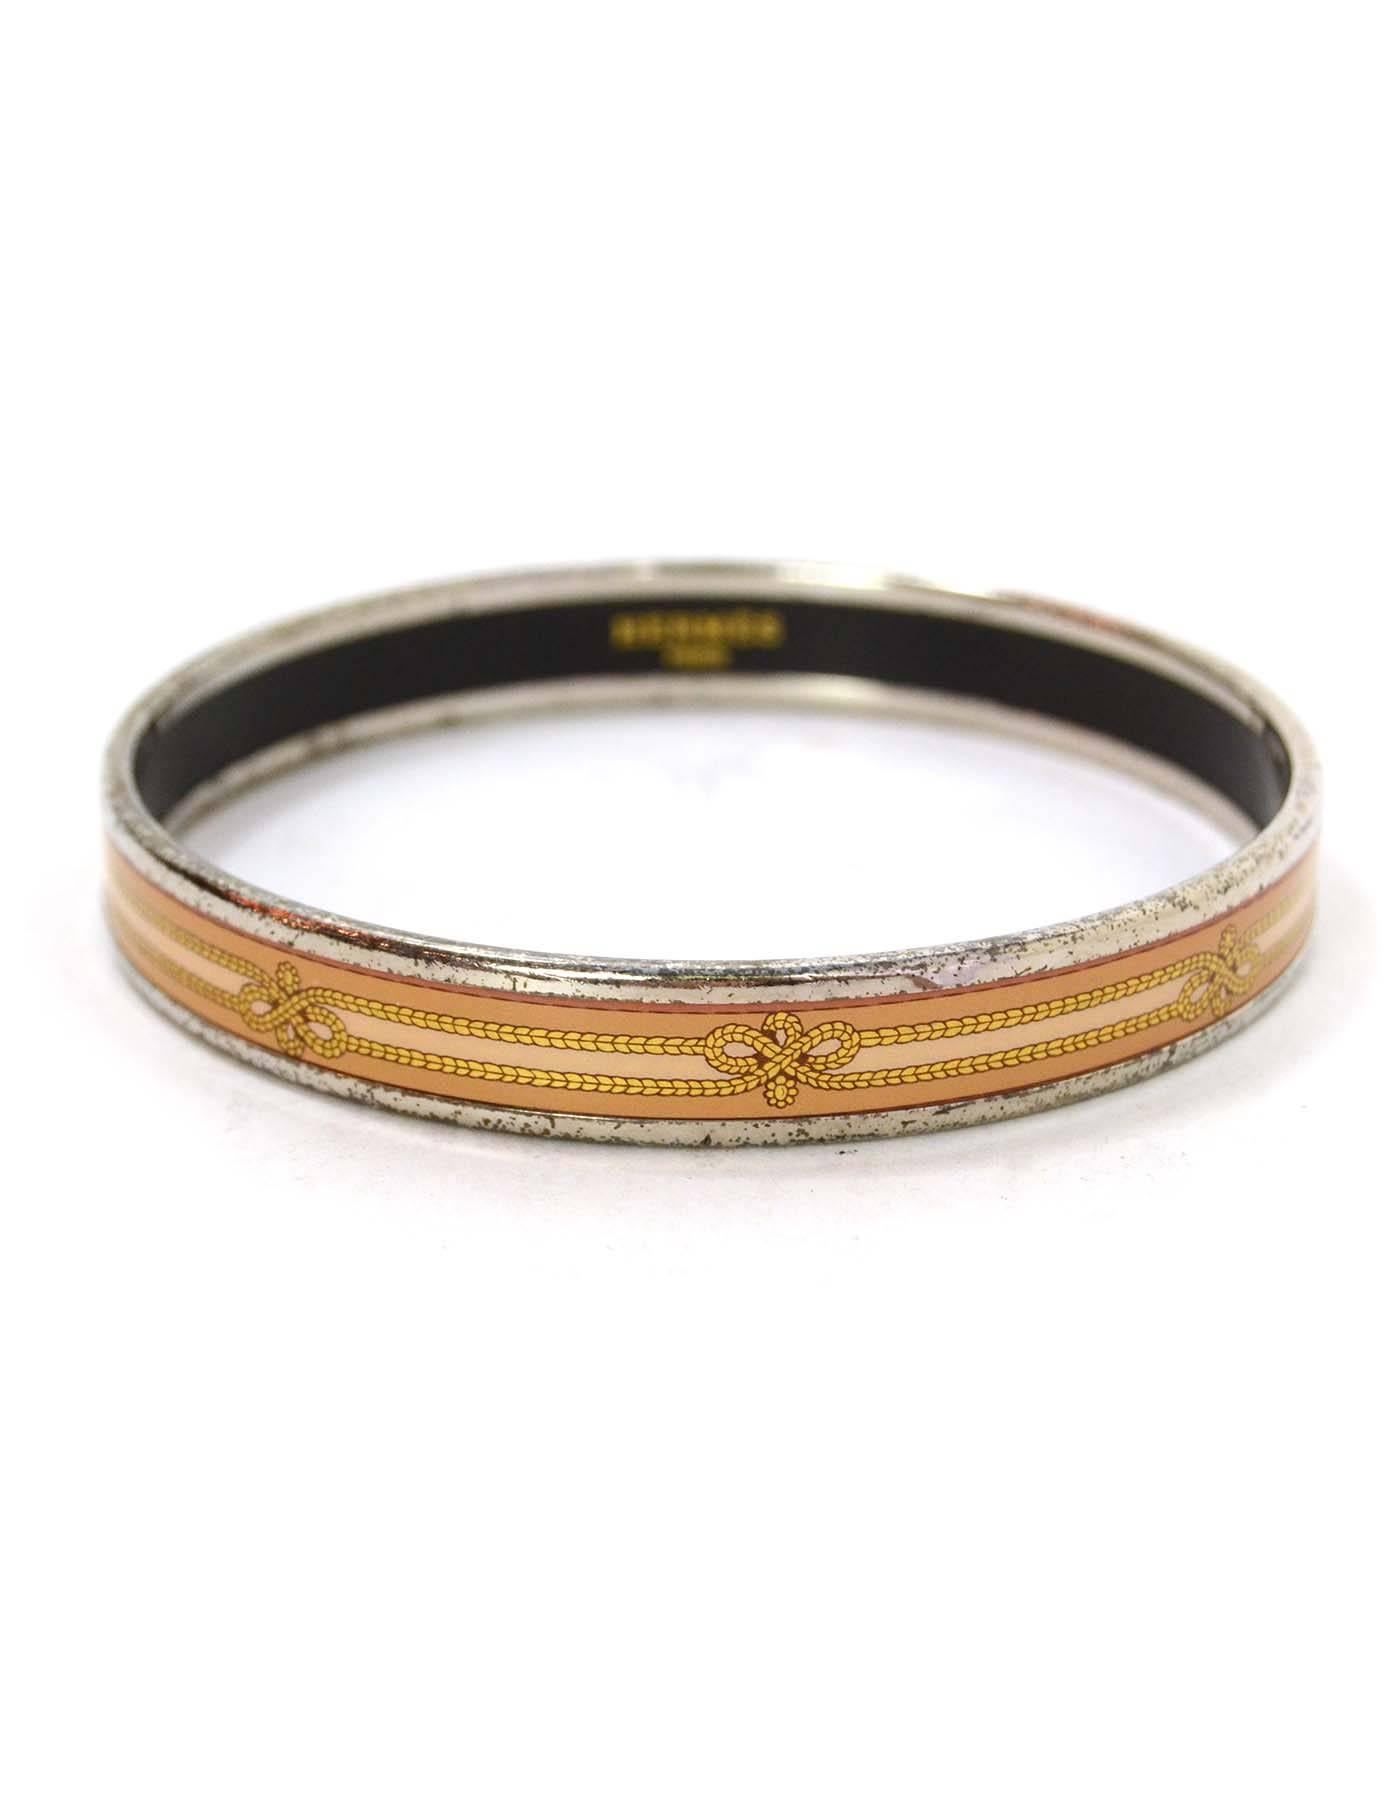 Hermes Narrow Printed Enamel Bangle 
Features peach and bronze rope printed throughout
Made In: Austria
Color: Peach, bronze and silvertone
Hardware: Palladium
Materials: Enamel and metal
Closure: None
Stamp: Made in Austria + I
Retail